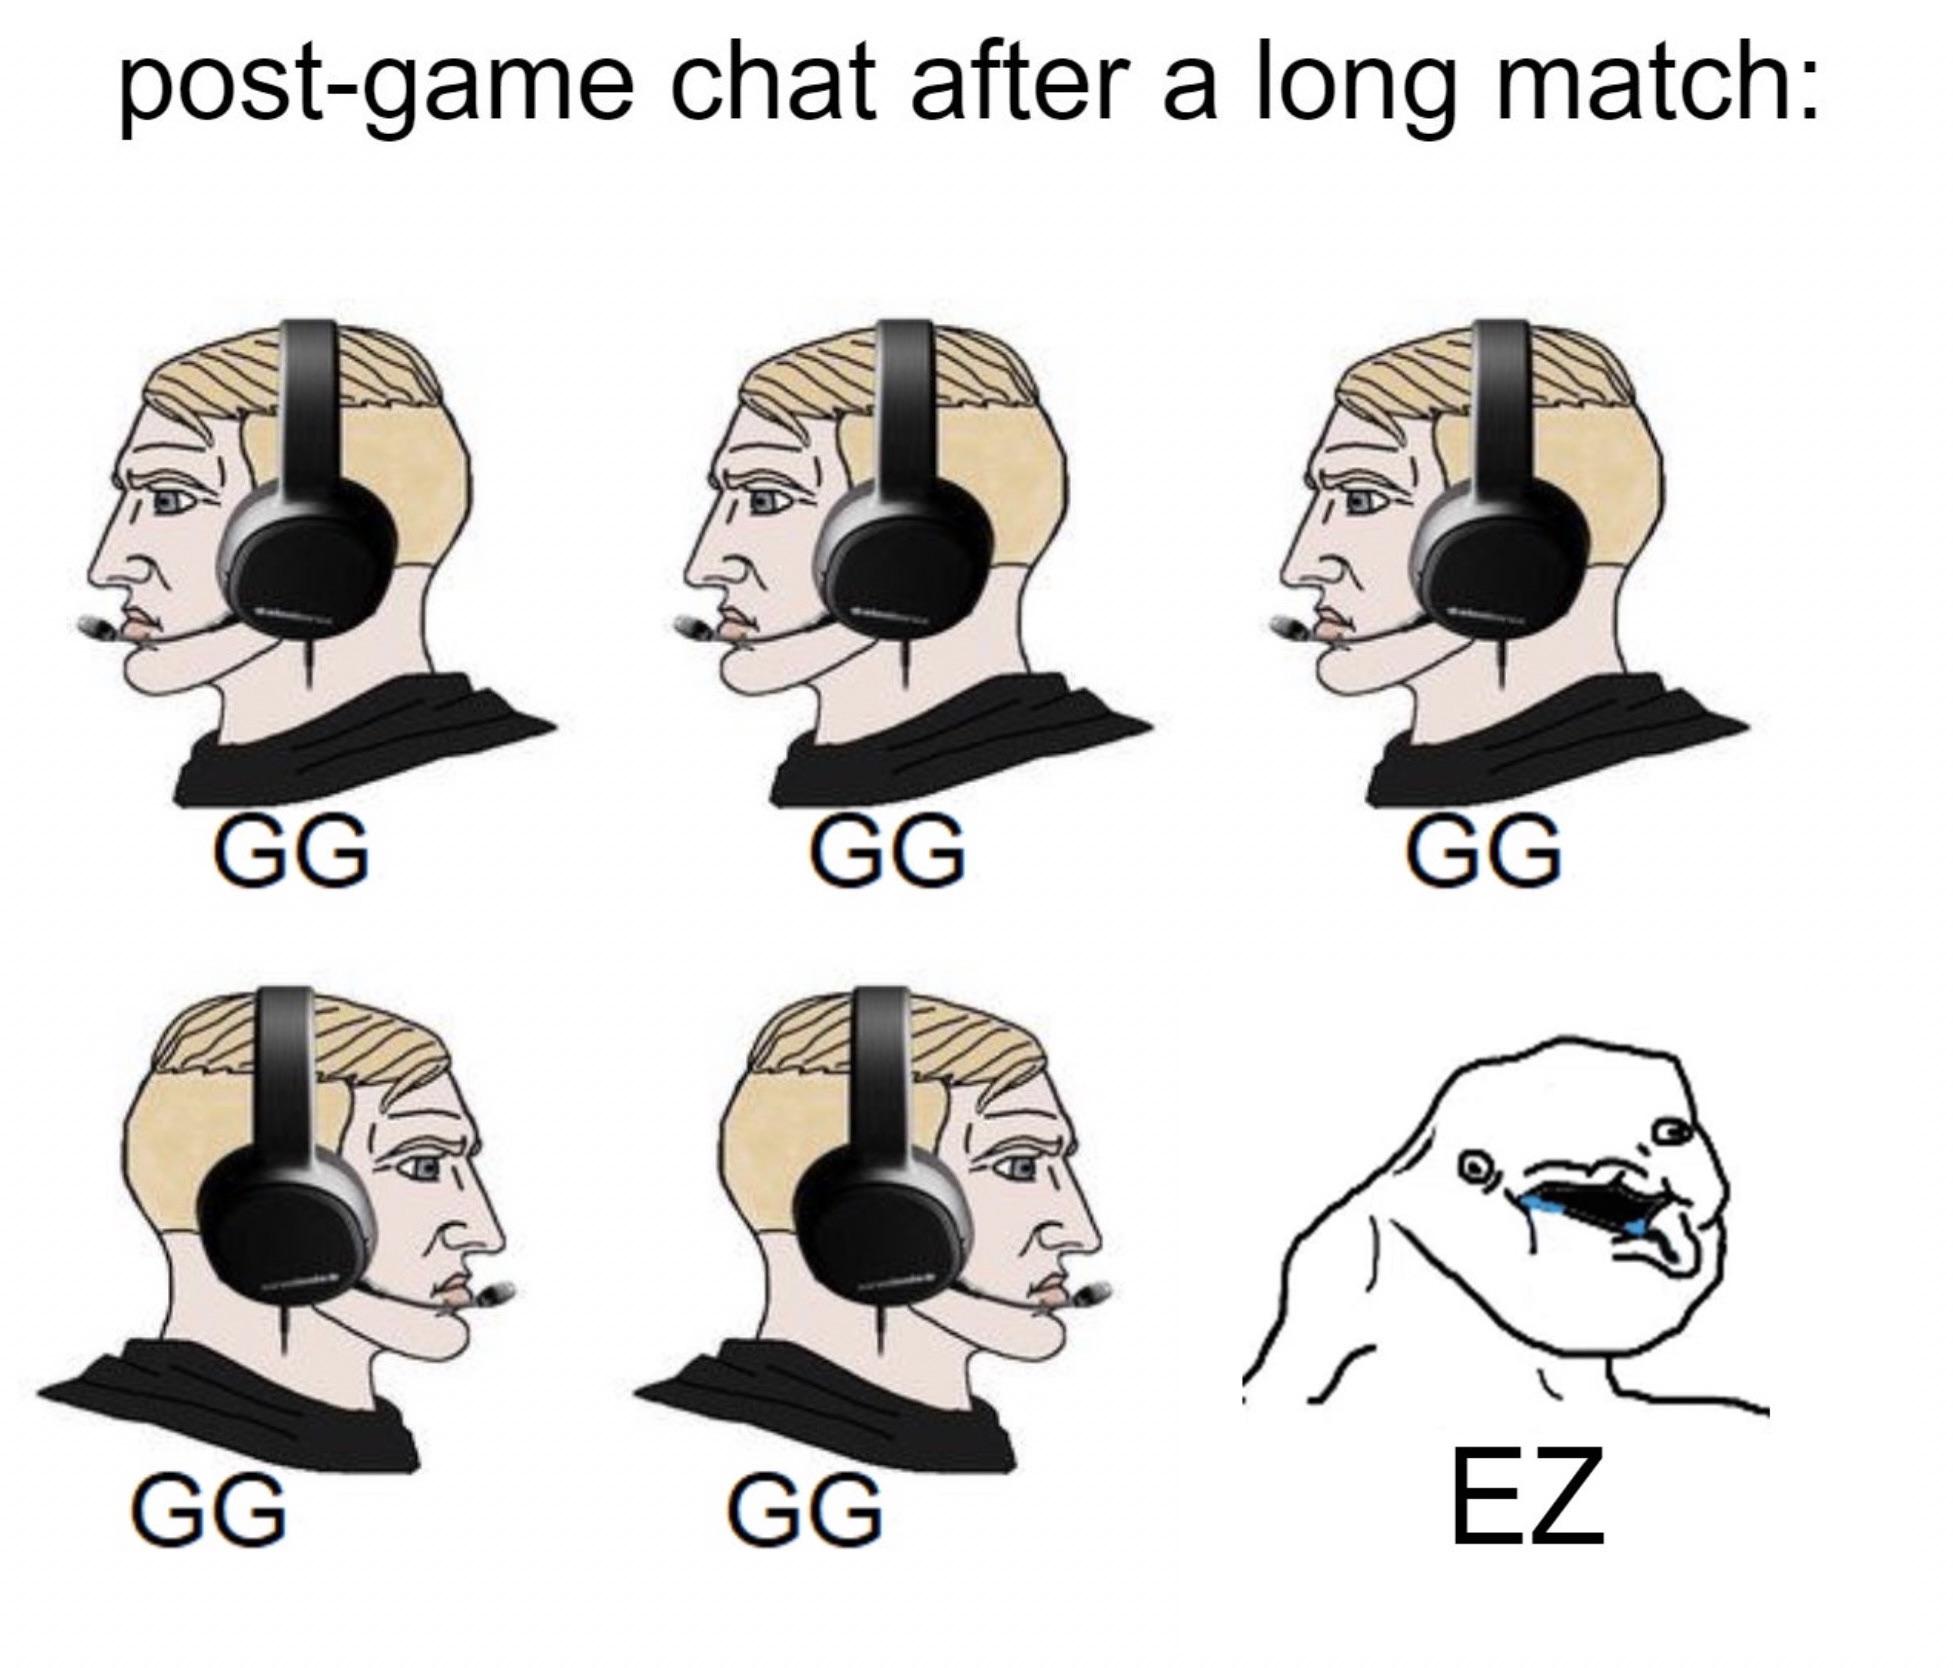 funny gaming memes - post game chat after a long match - postgame chat after a long match Gg Gg Gg Gg Gg Ez